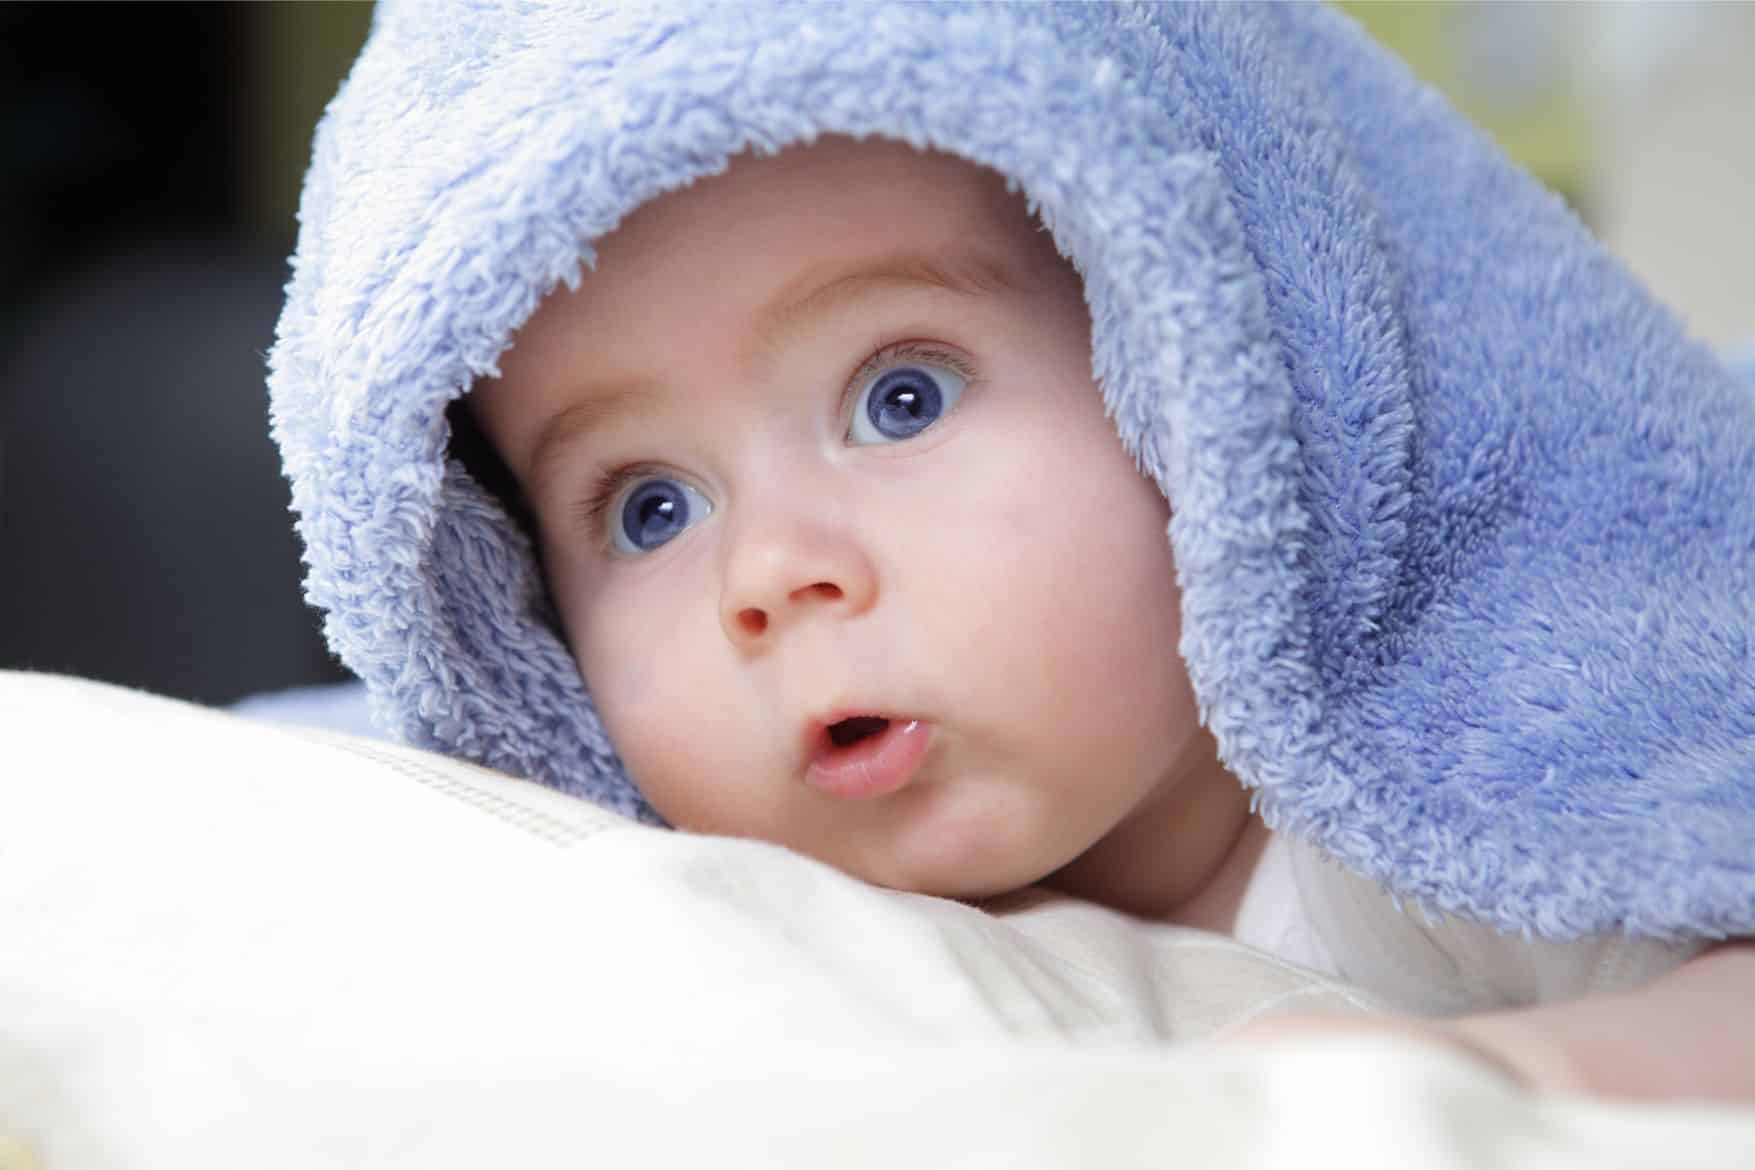 image of a newborn baby with a blanket on them